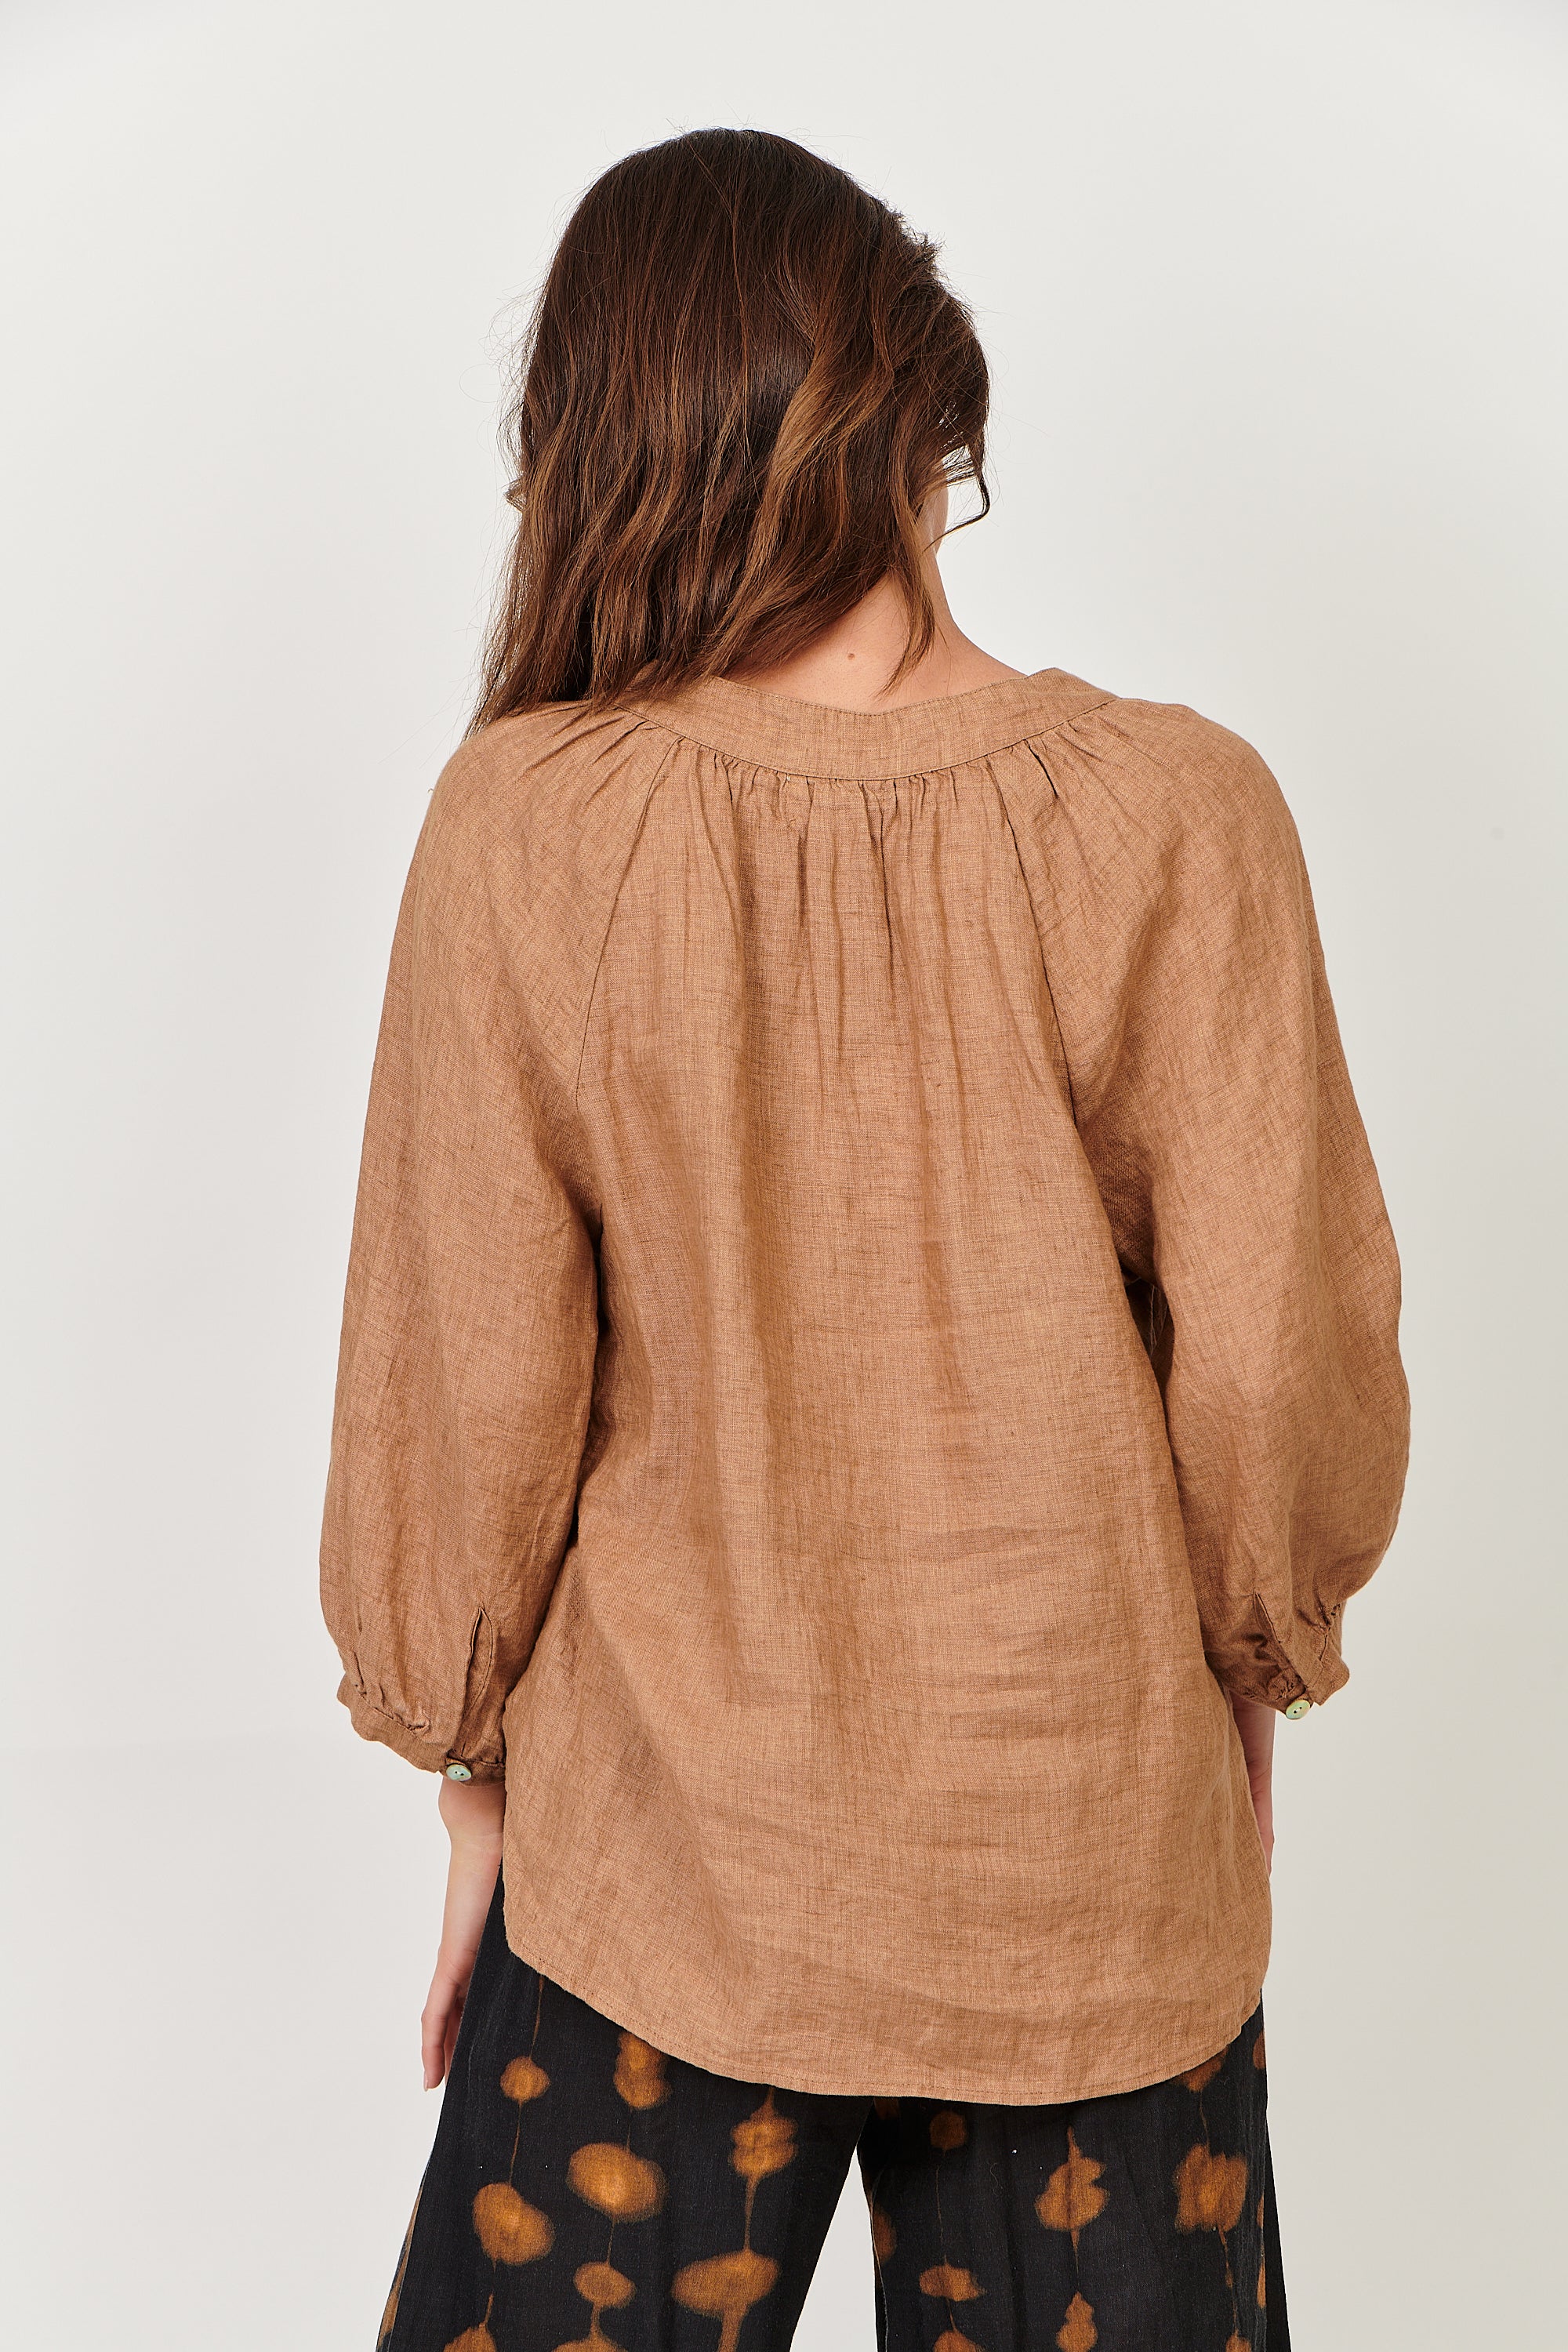 Linen Top - Chai-Tops-Naturals by O&J-The Bay Room